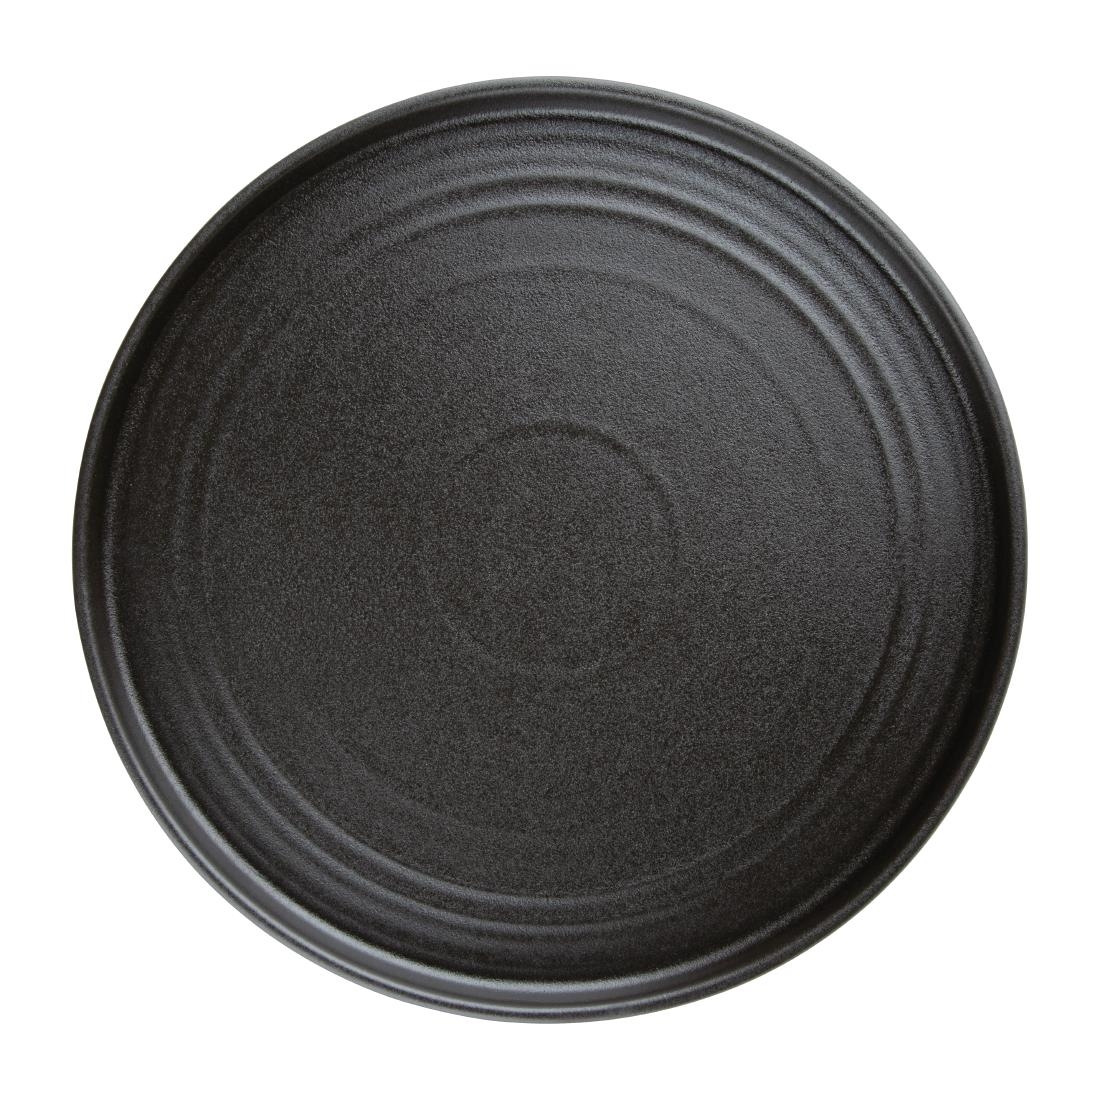 Olympia Cavolo Textured Black Flat Round Plates 270mm (Pack of 4)